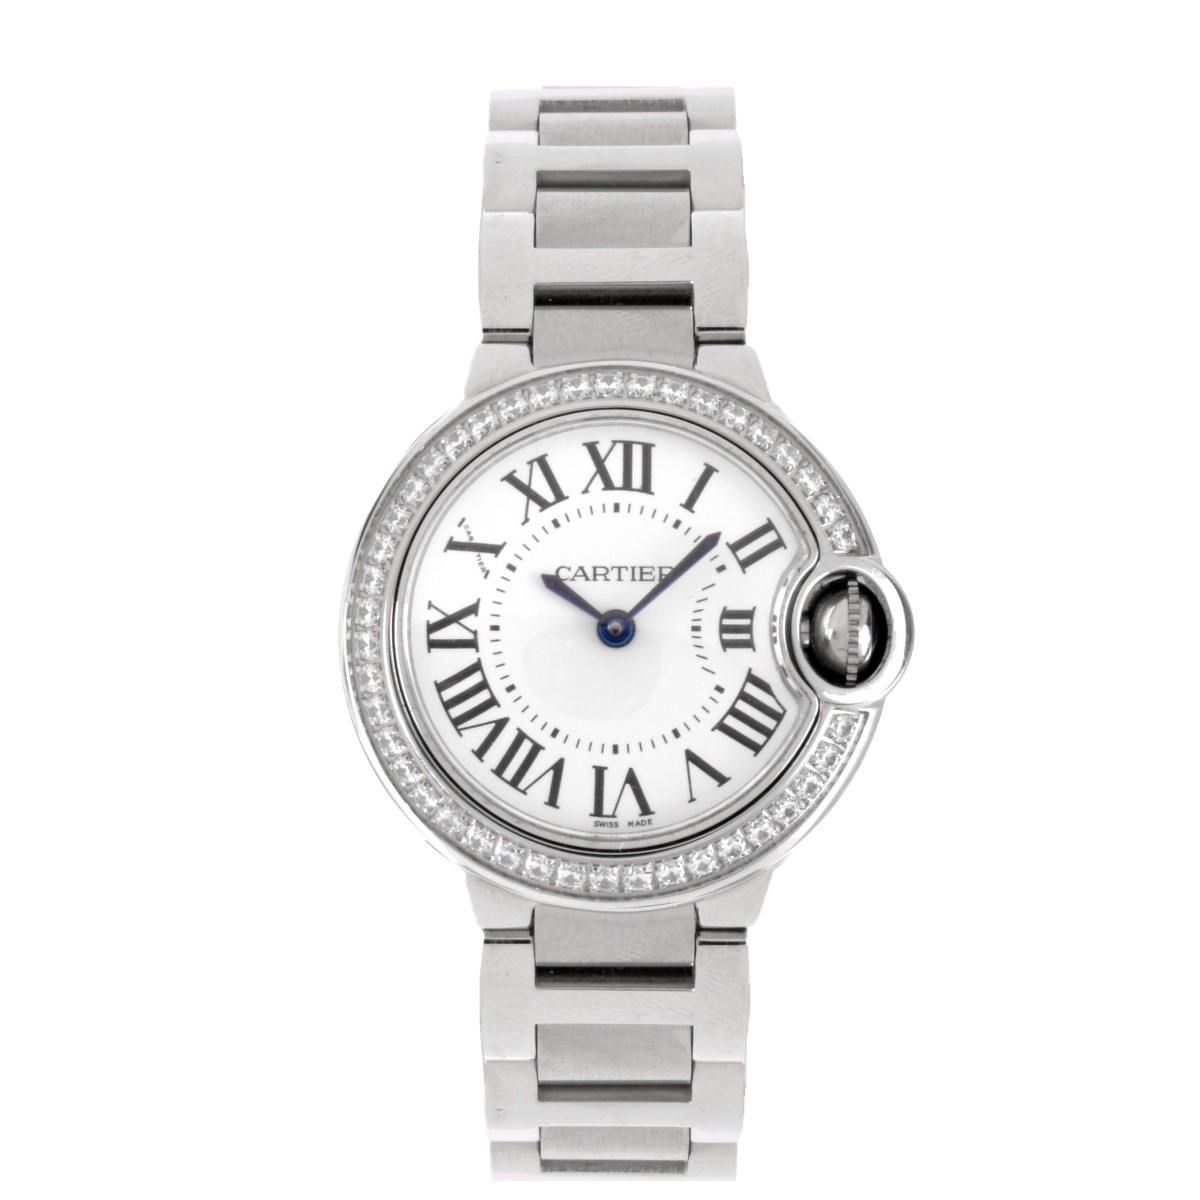 Cartier style Watch